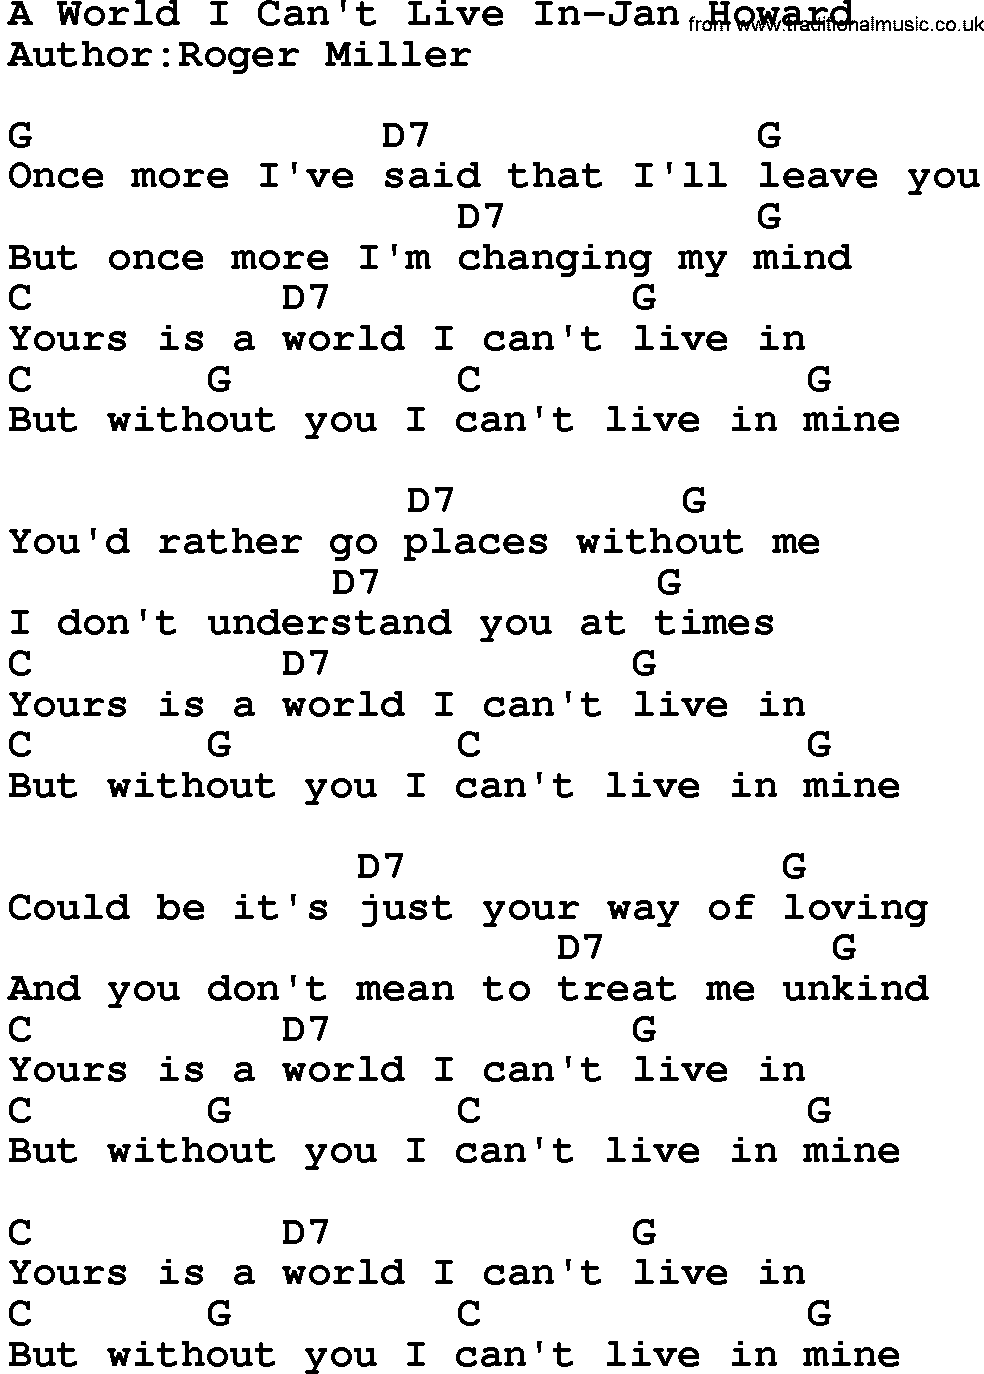 Country music song: A World I Can't Live In-Jan Howard lyrics and chords